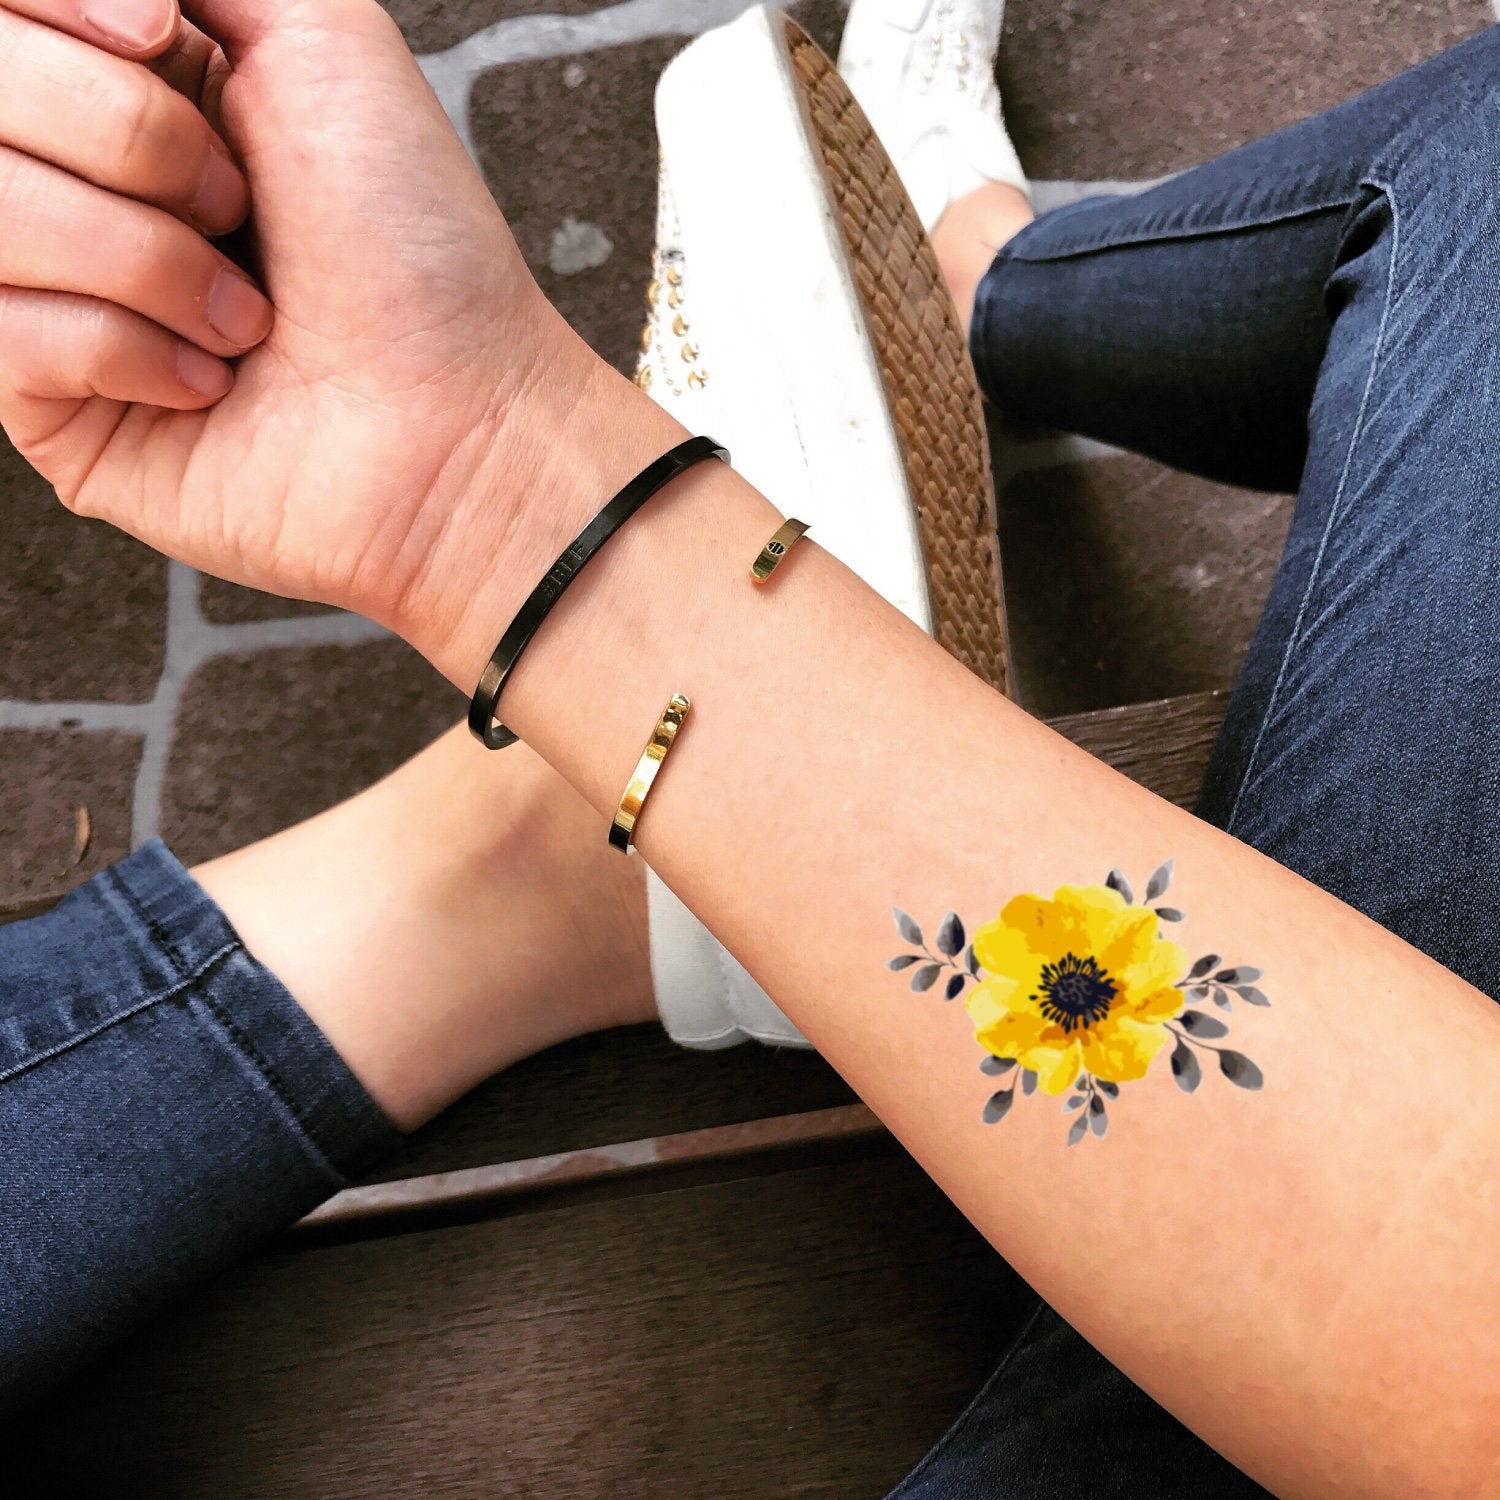 fake small yellow rose flower color temporary tattoo sticker design idea on forearm